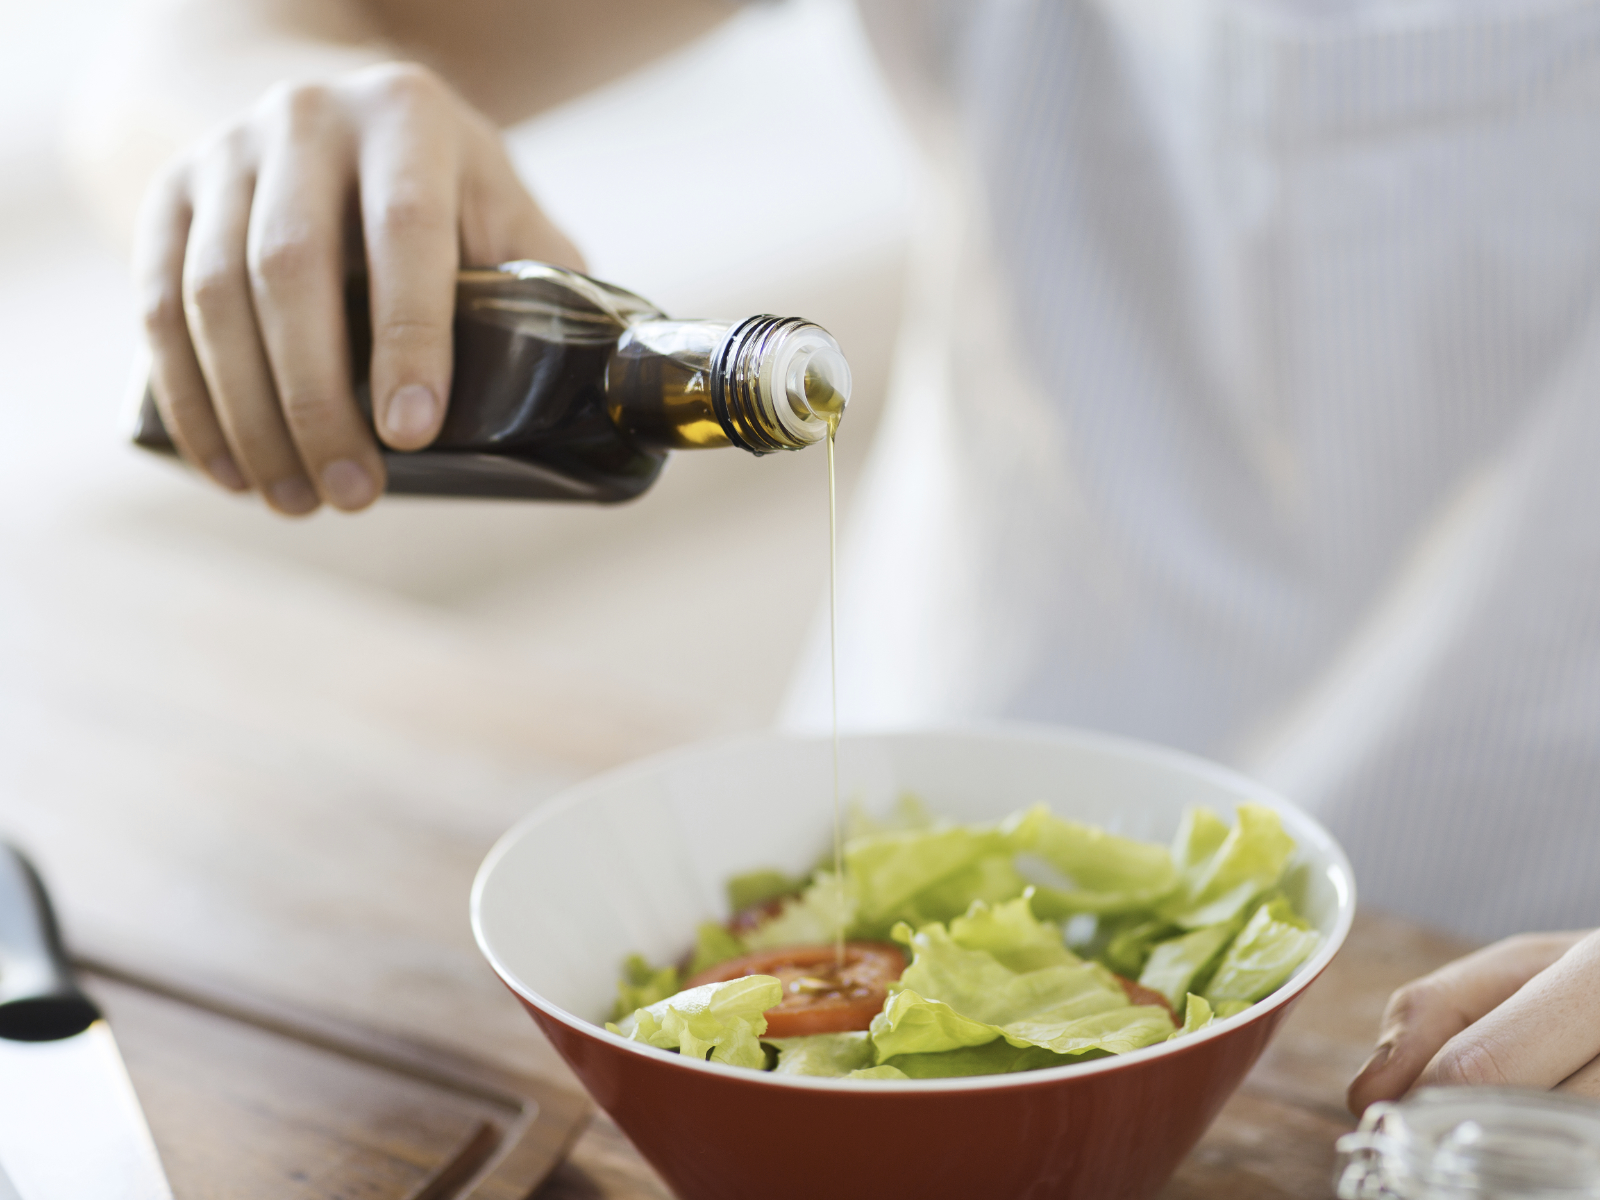 man drizzling olive oil onto a salad